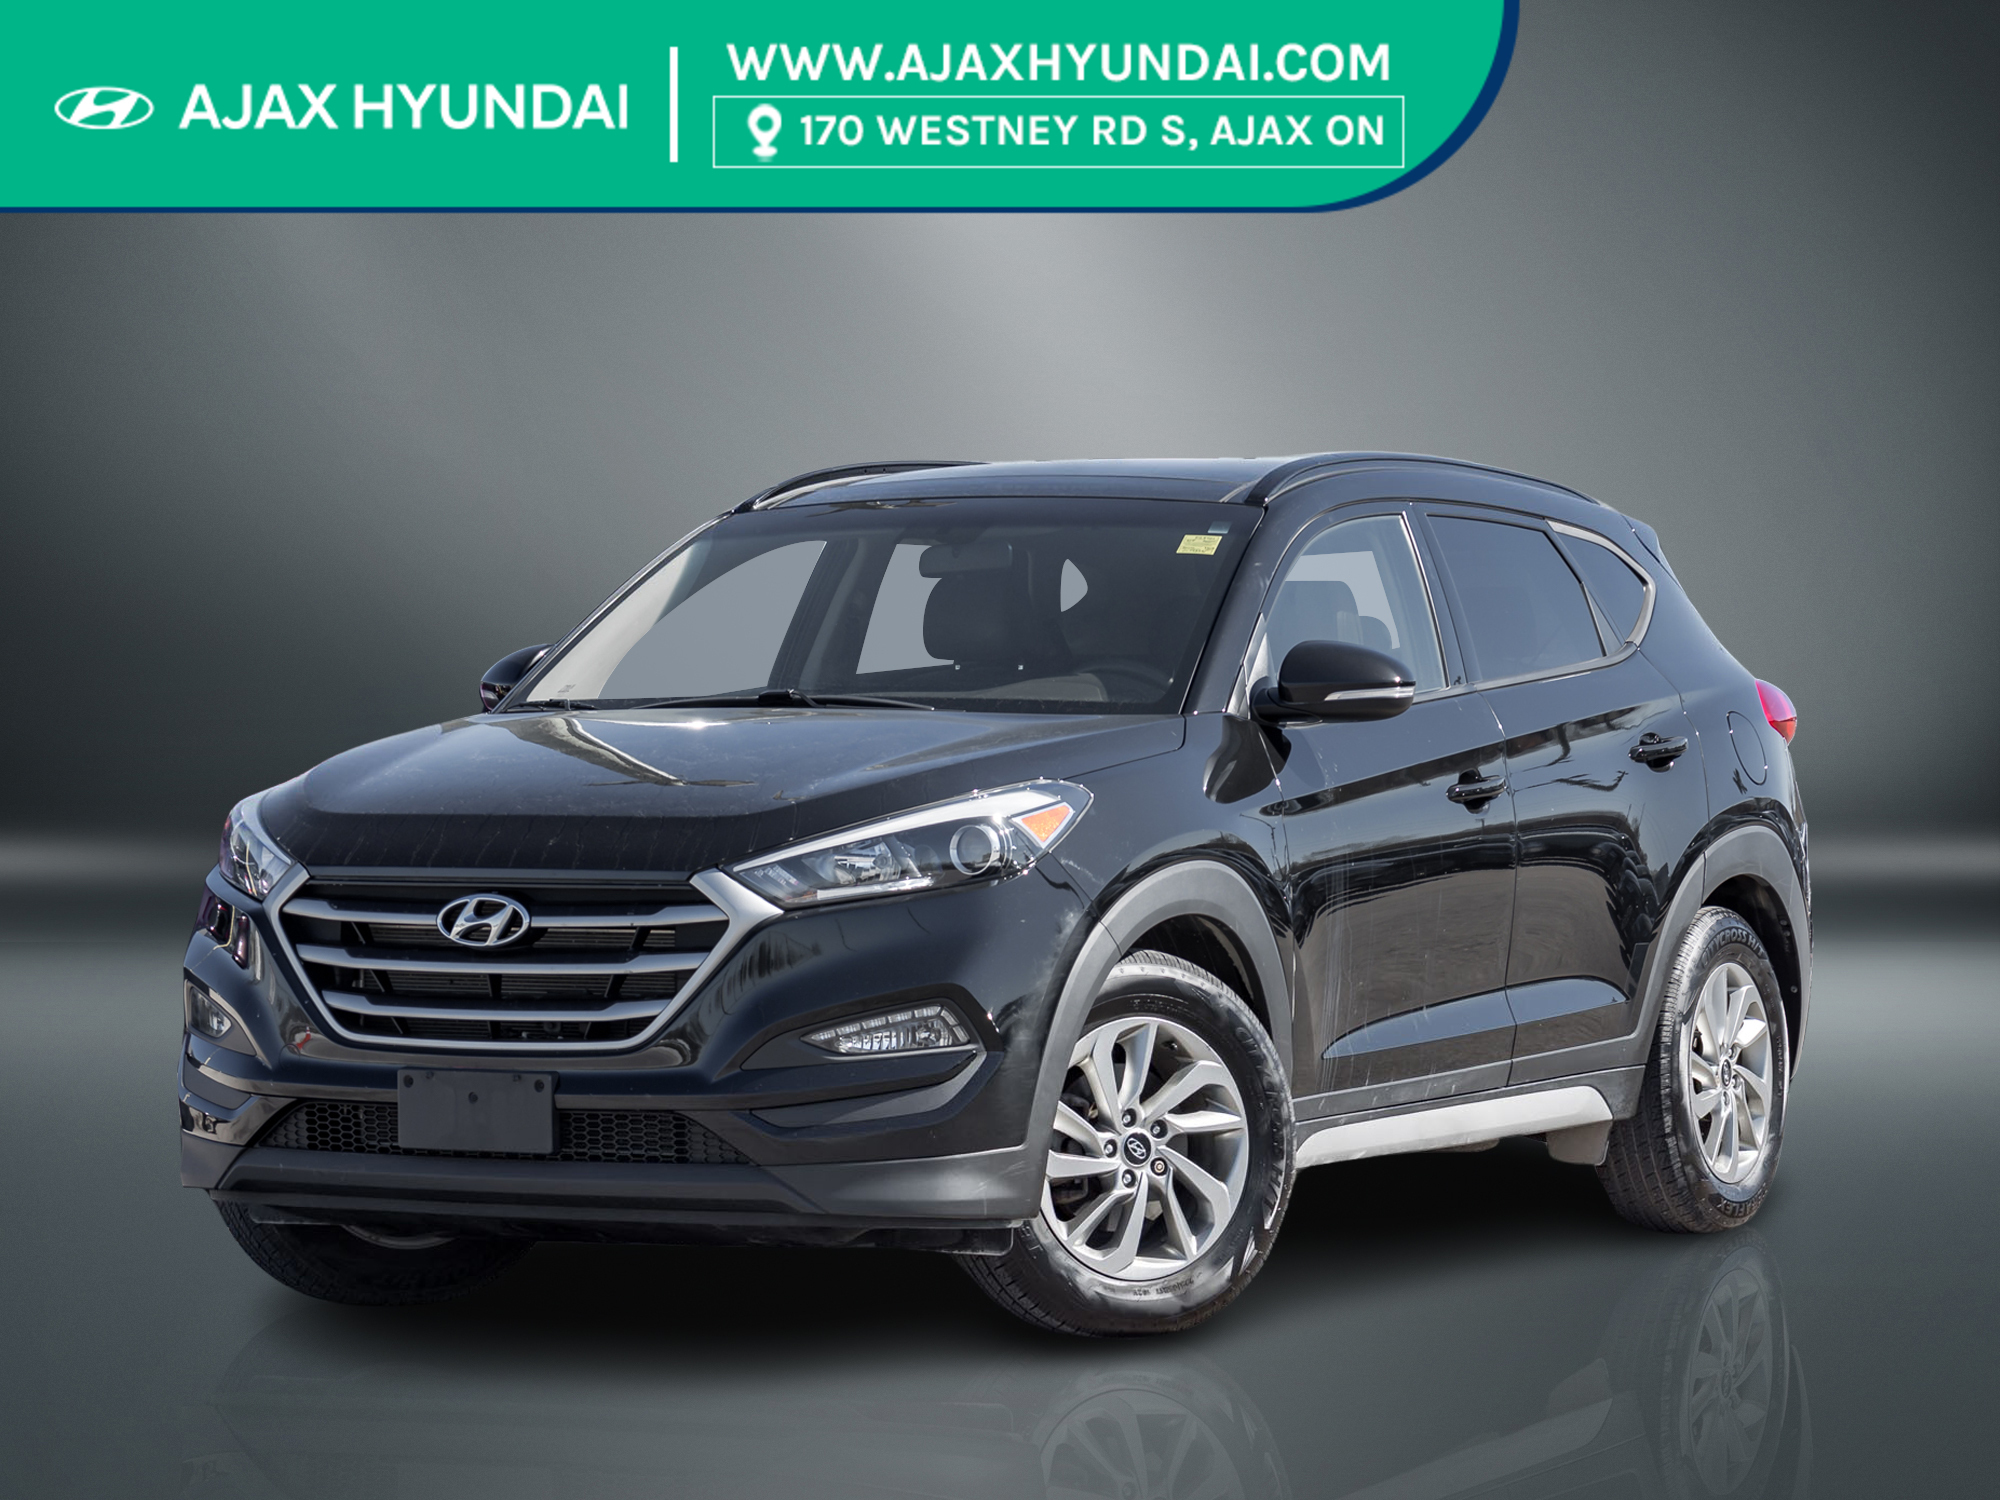 2018 Hyundai Tucson ONE OWNER | NO ACCIDENT ONE OWNER | NO ACCIDENT ON